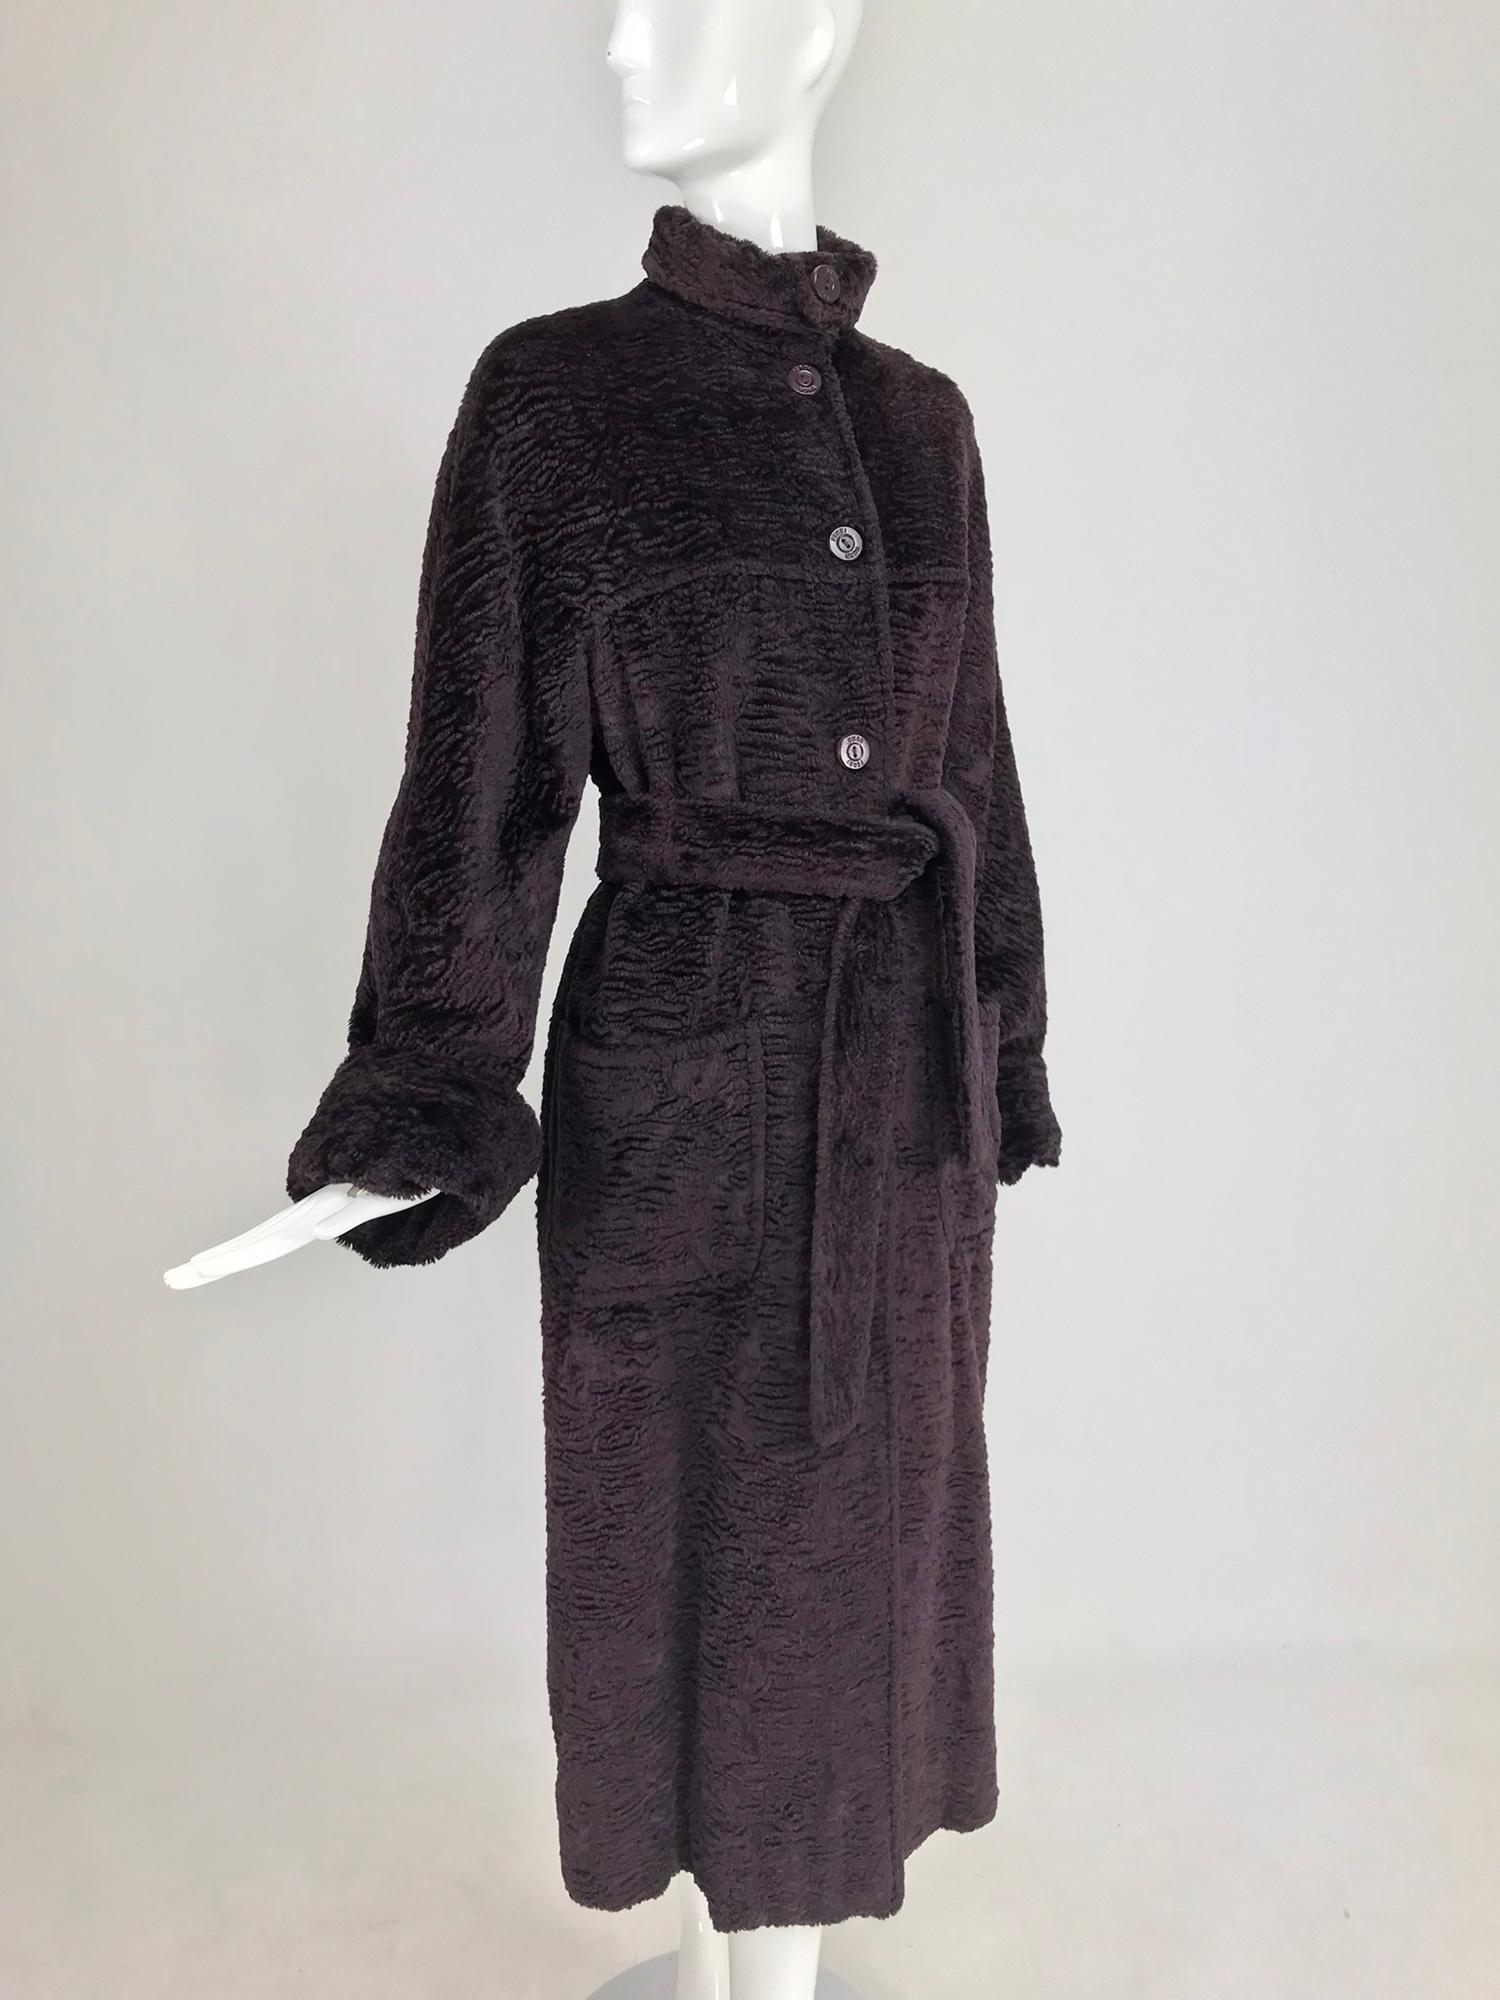 Fendi Aubergine Faux Karakul Belted Coat from the 1990s. This beautiful coat closes at the front with Fendi logo buttons, the neck closes as a turtle neck, turned over to protect your neck from the wind. The long sleeve coat has deep turn back